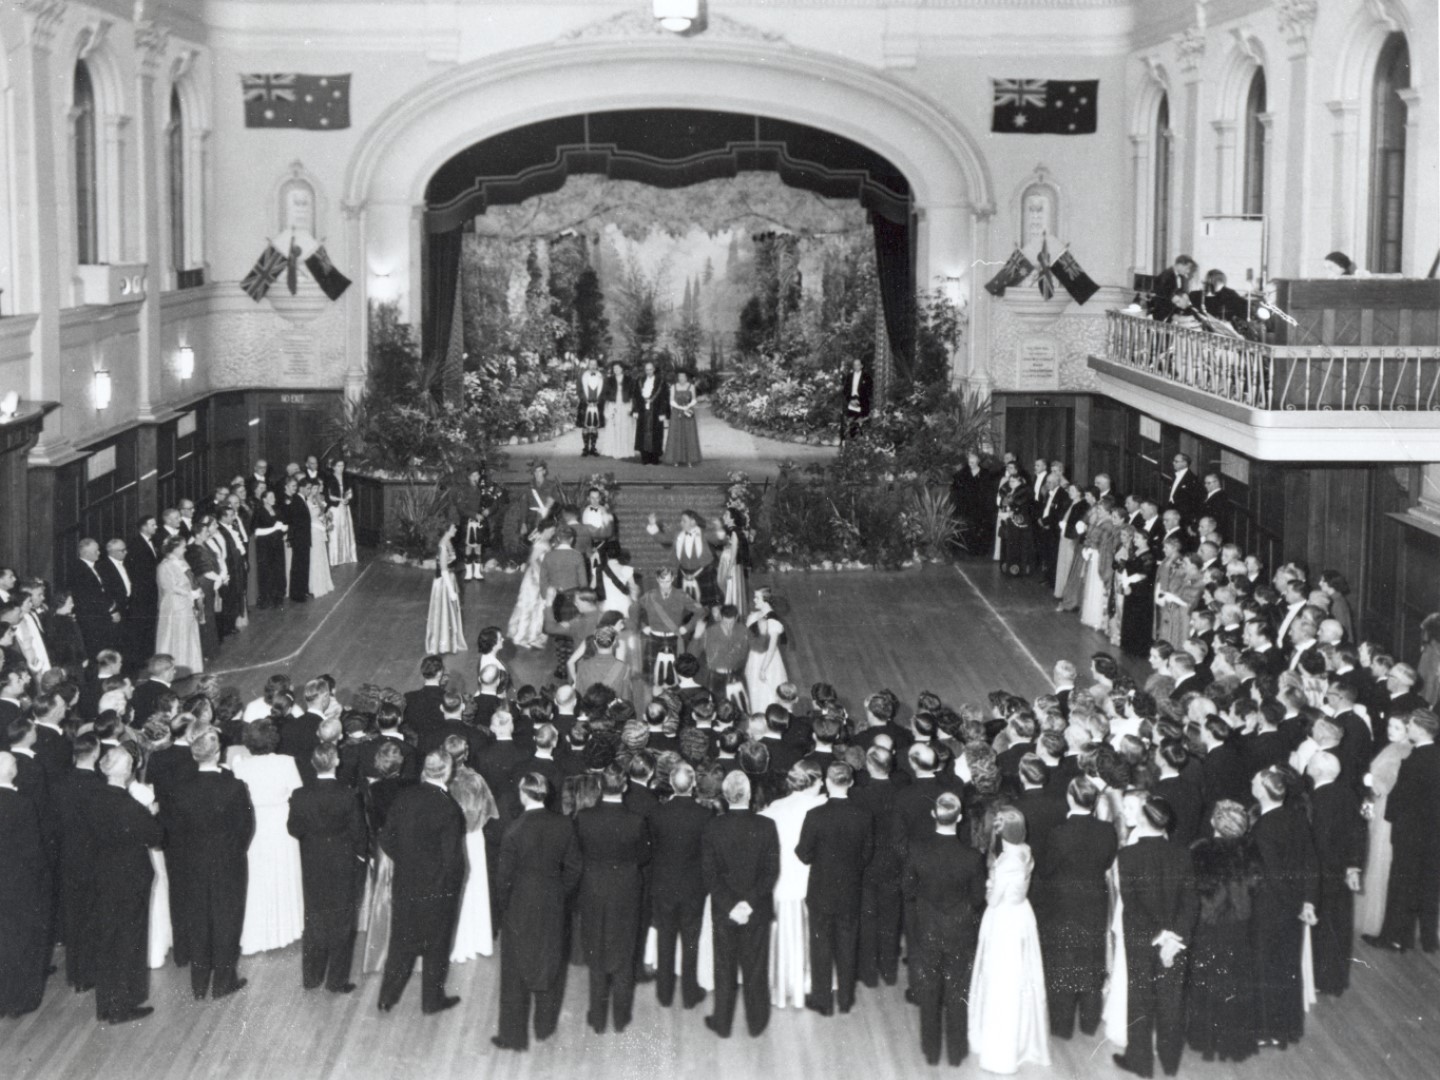 elegantly dressed men and women standing around the edges of the Main Hall at Hawthorn town hall. In the middle of the space are dancing couples